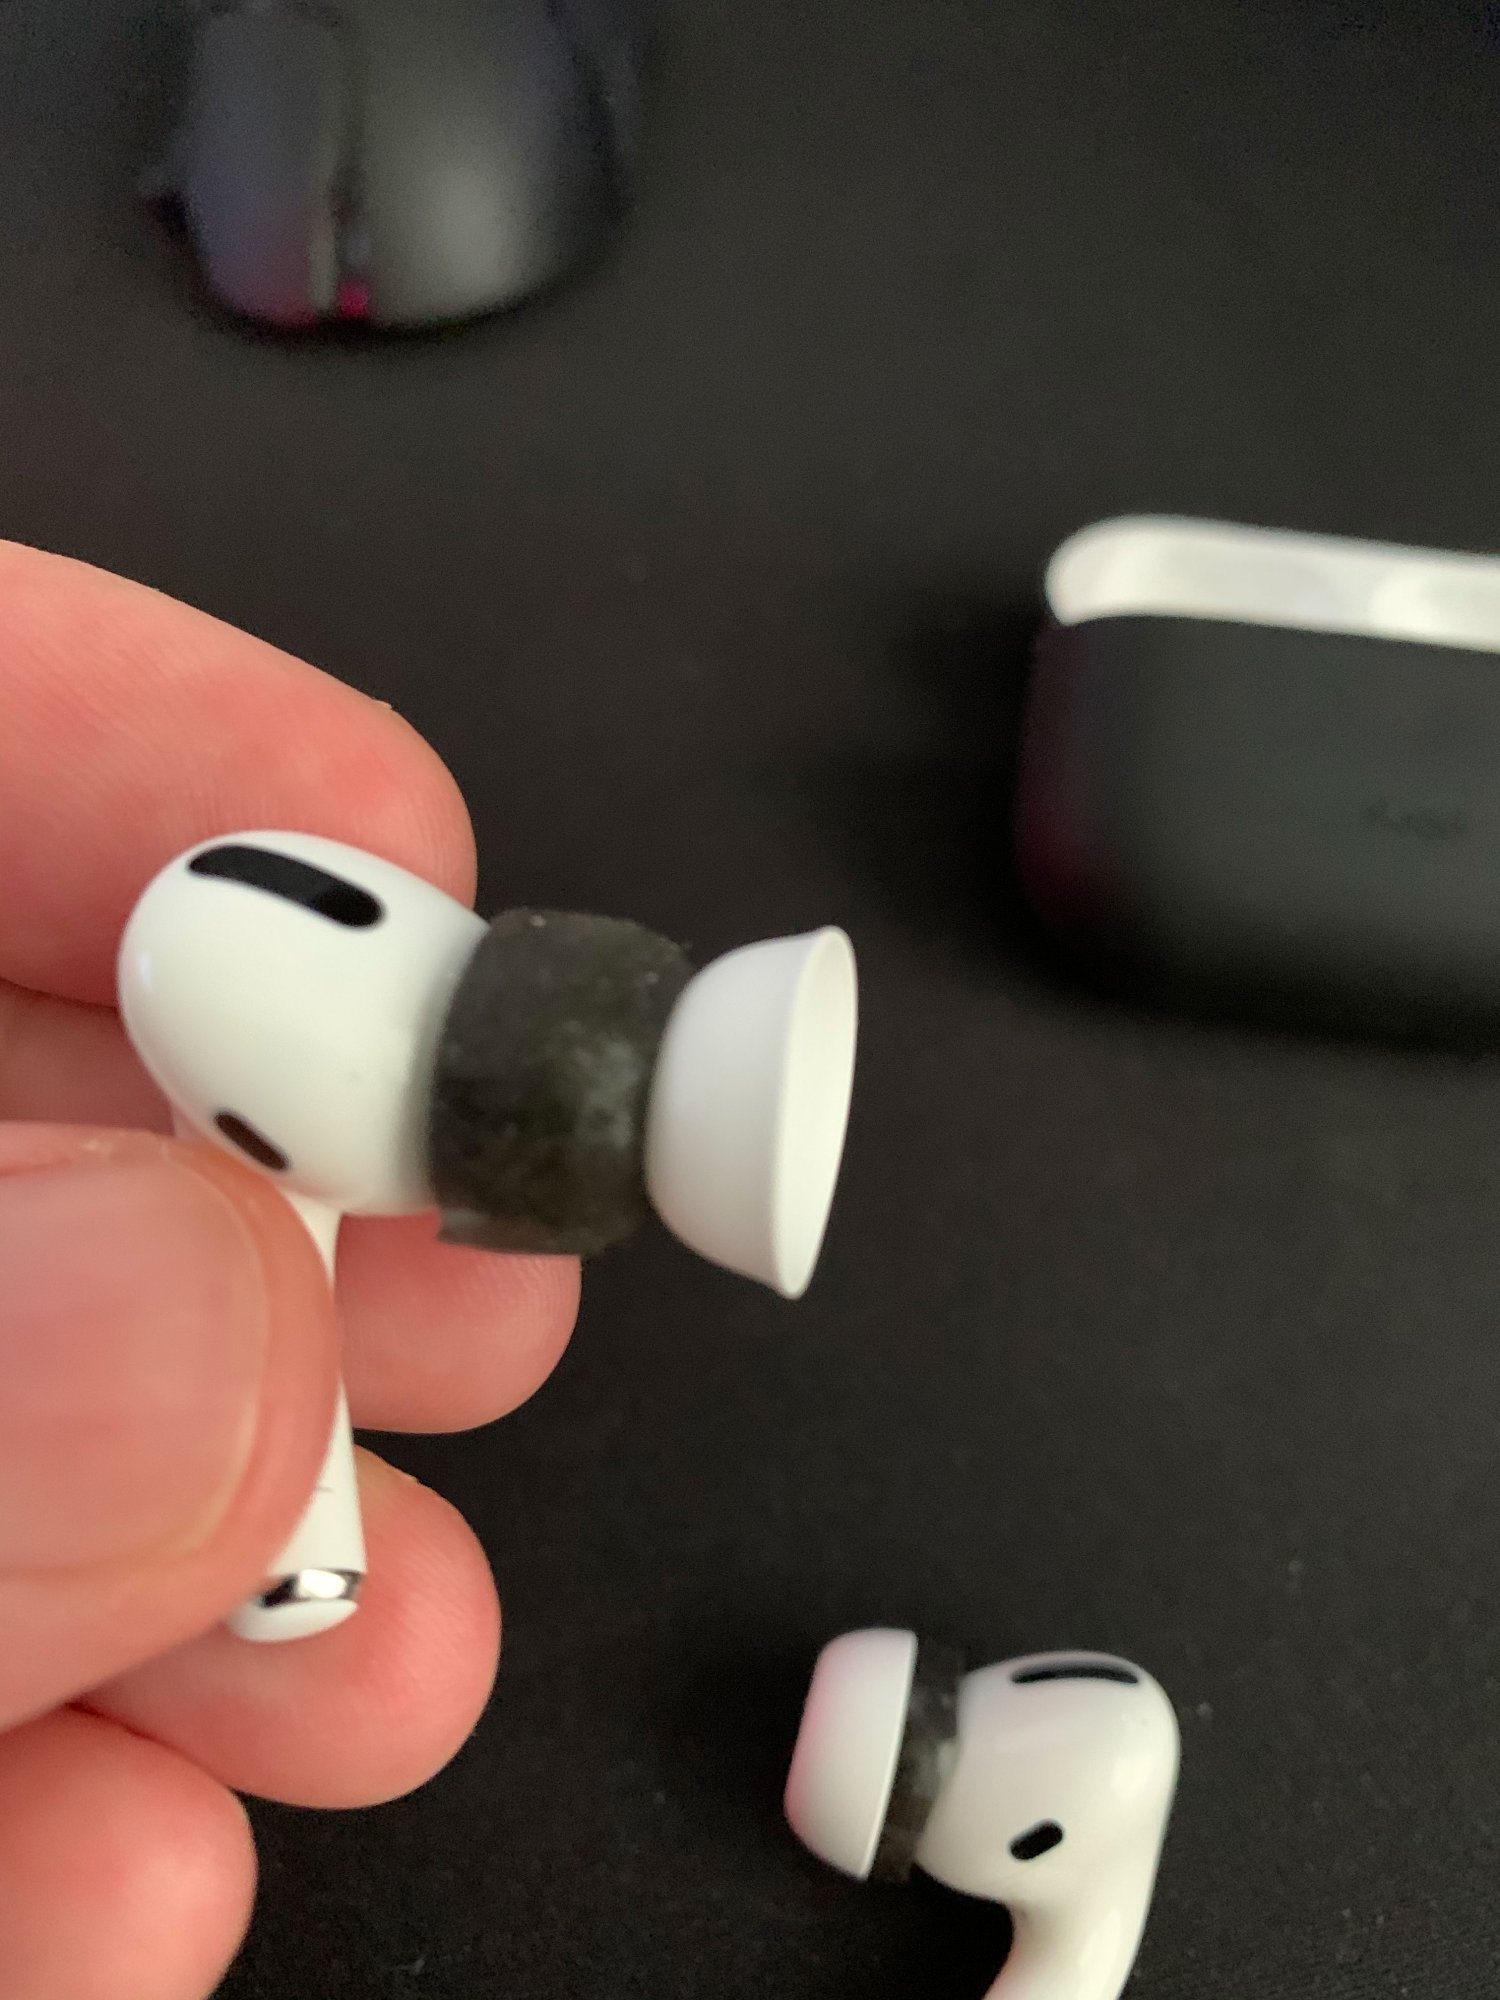 Shackle squat Shadow AirPods Pro keep falling out of ear | MacRumors Forums